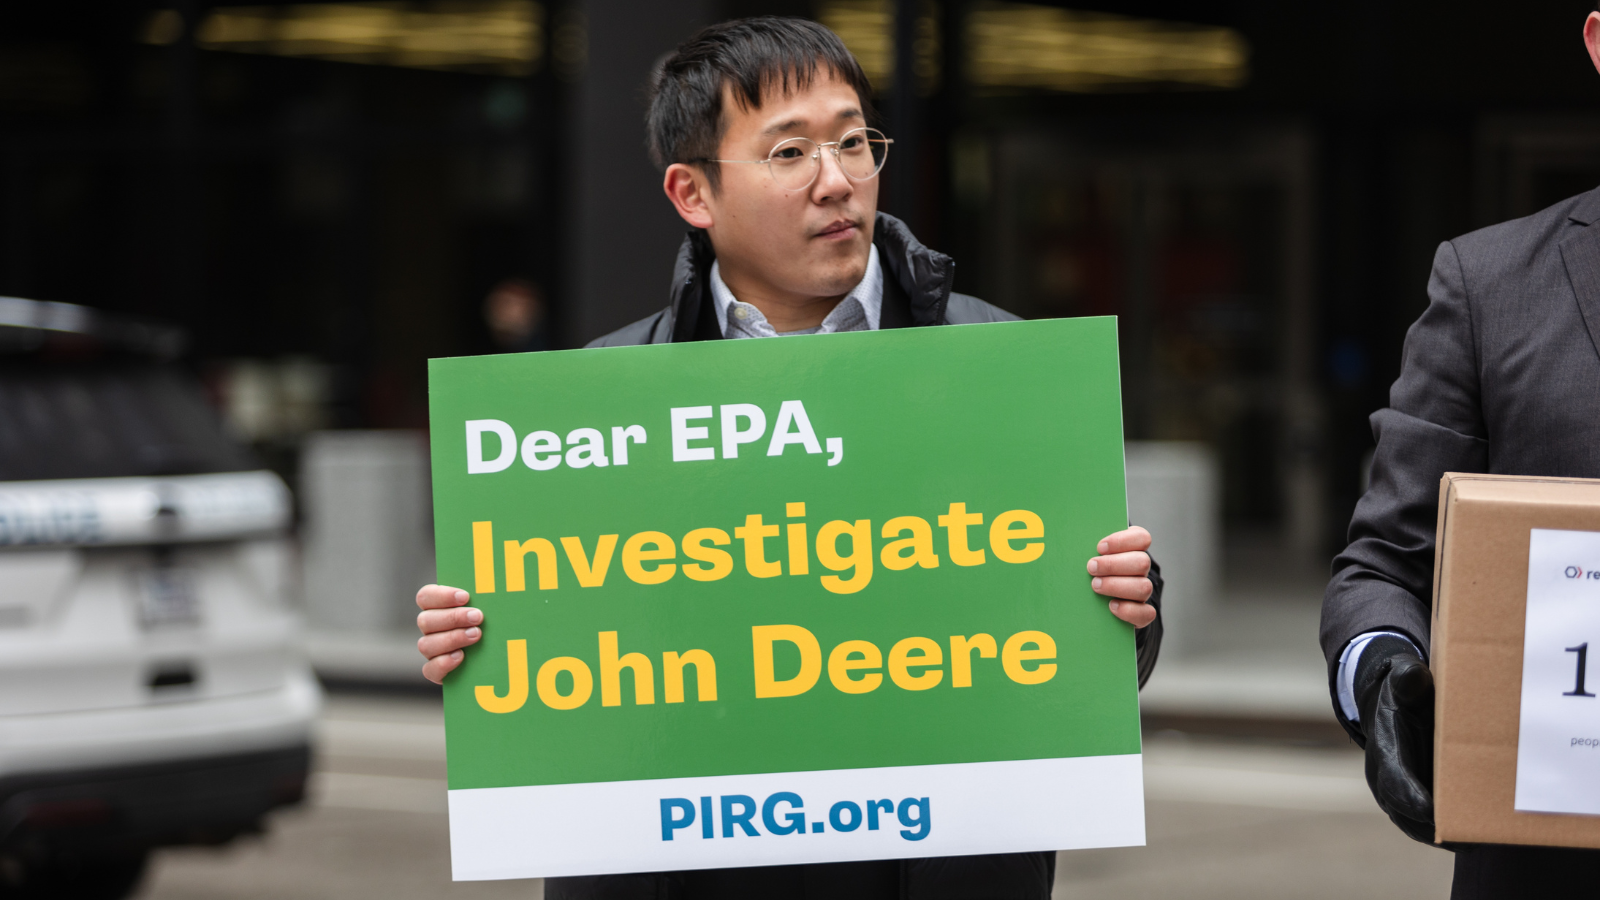 An advocate holds a green and yellow sign that says 